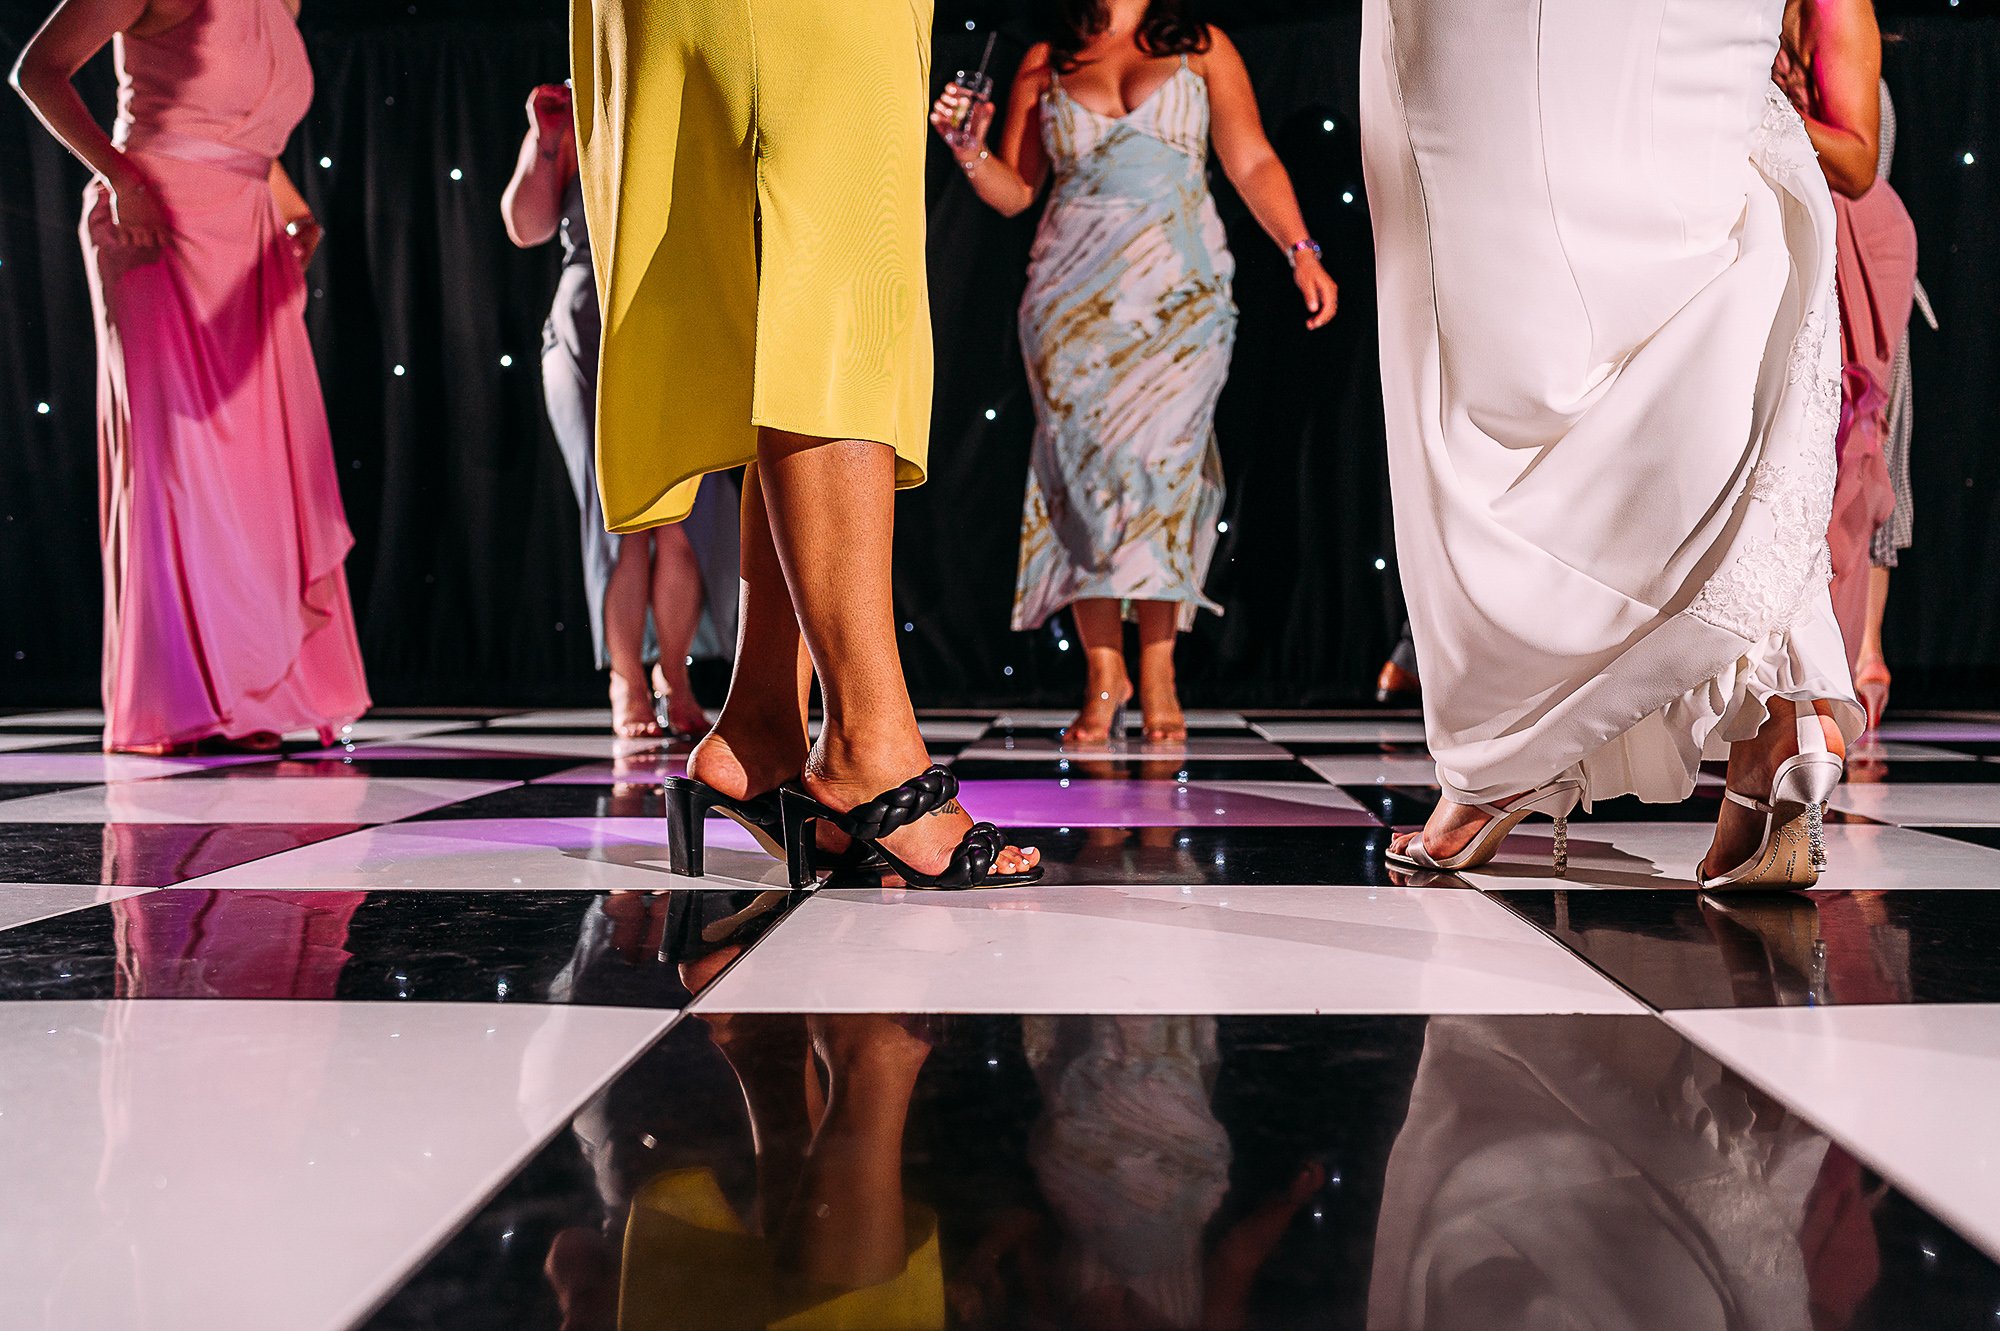  Feet on a chequered dance floor with colourful dresses. 